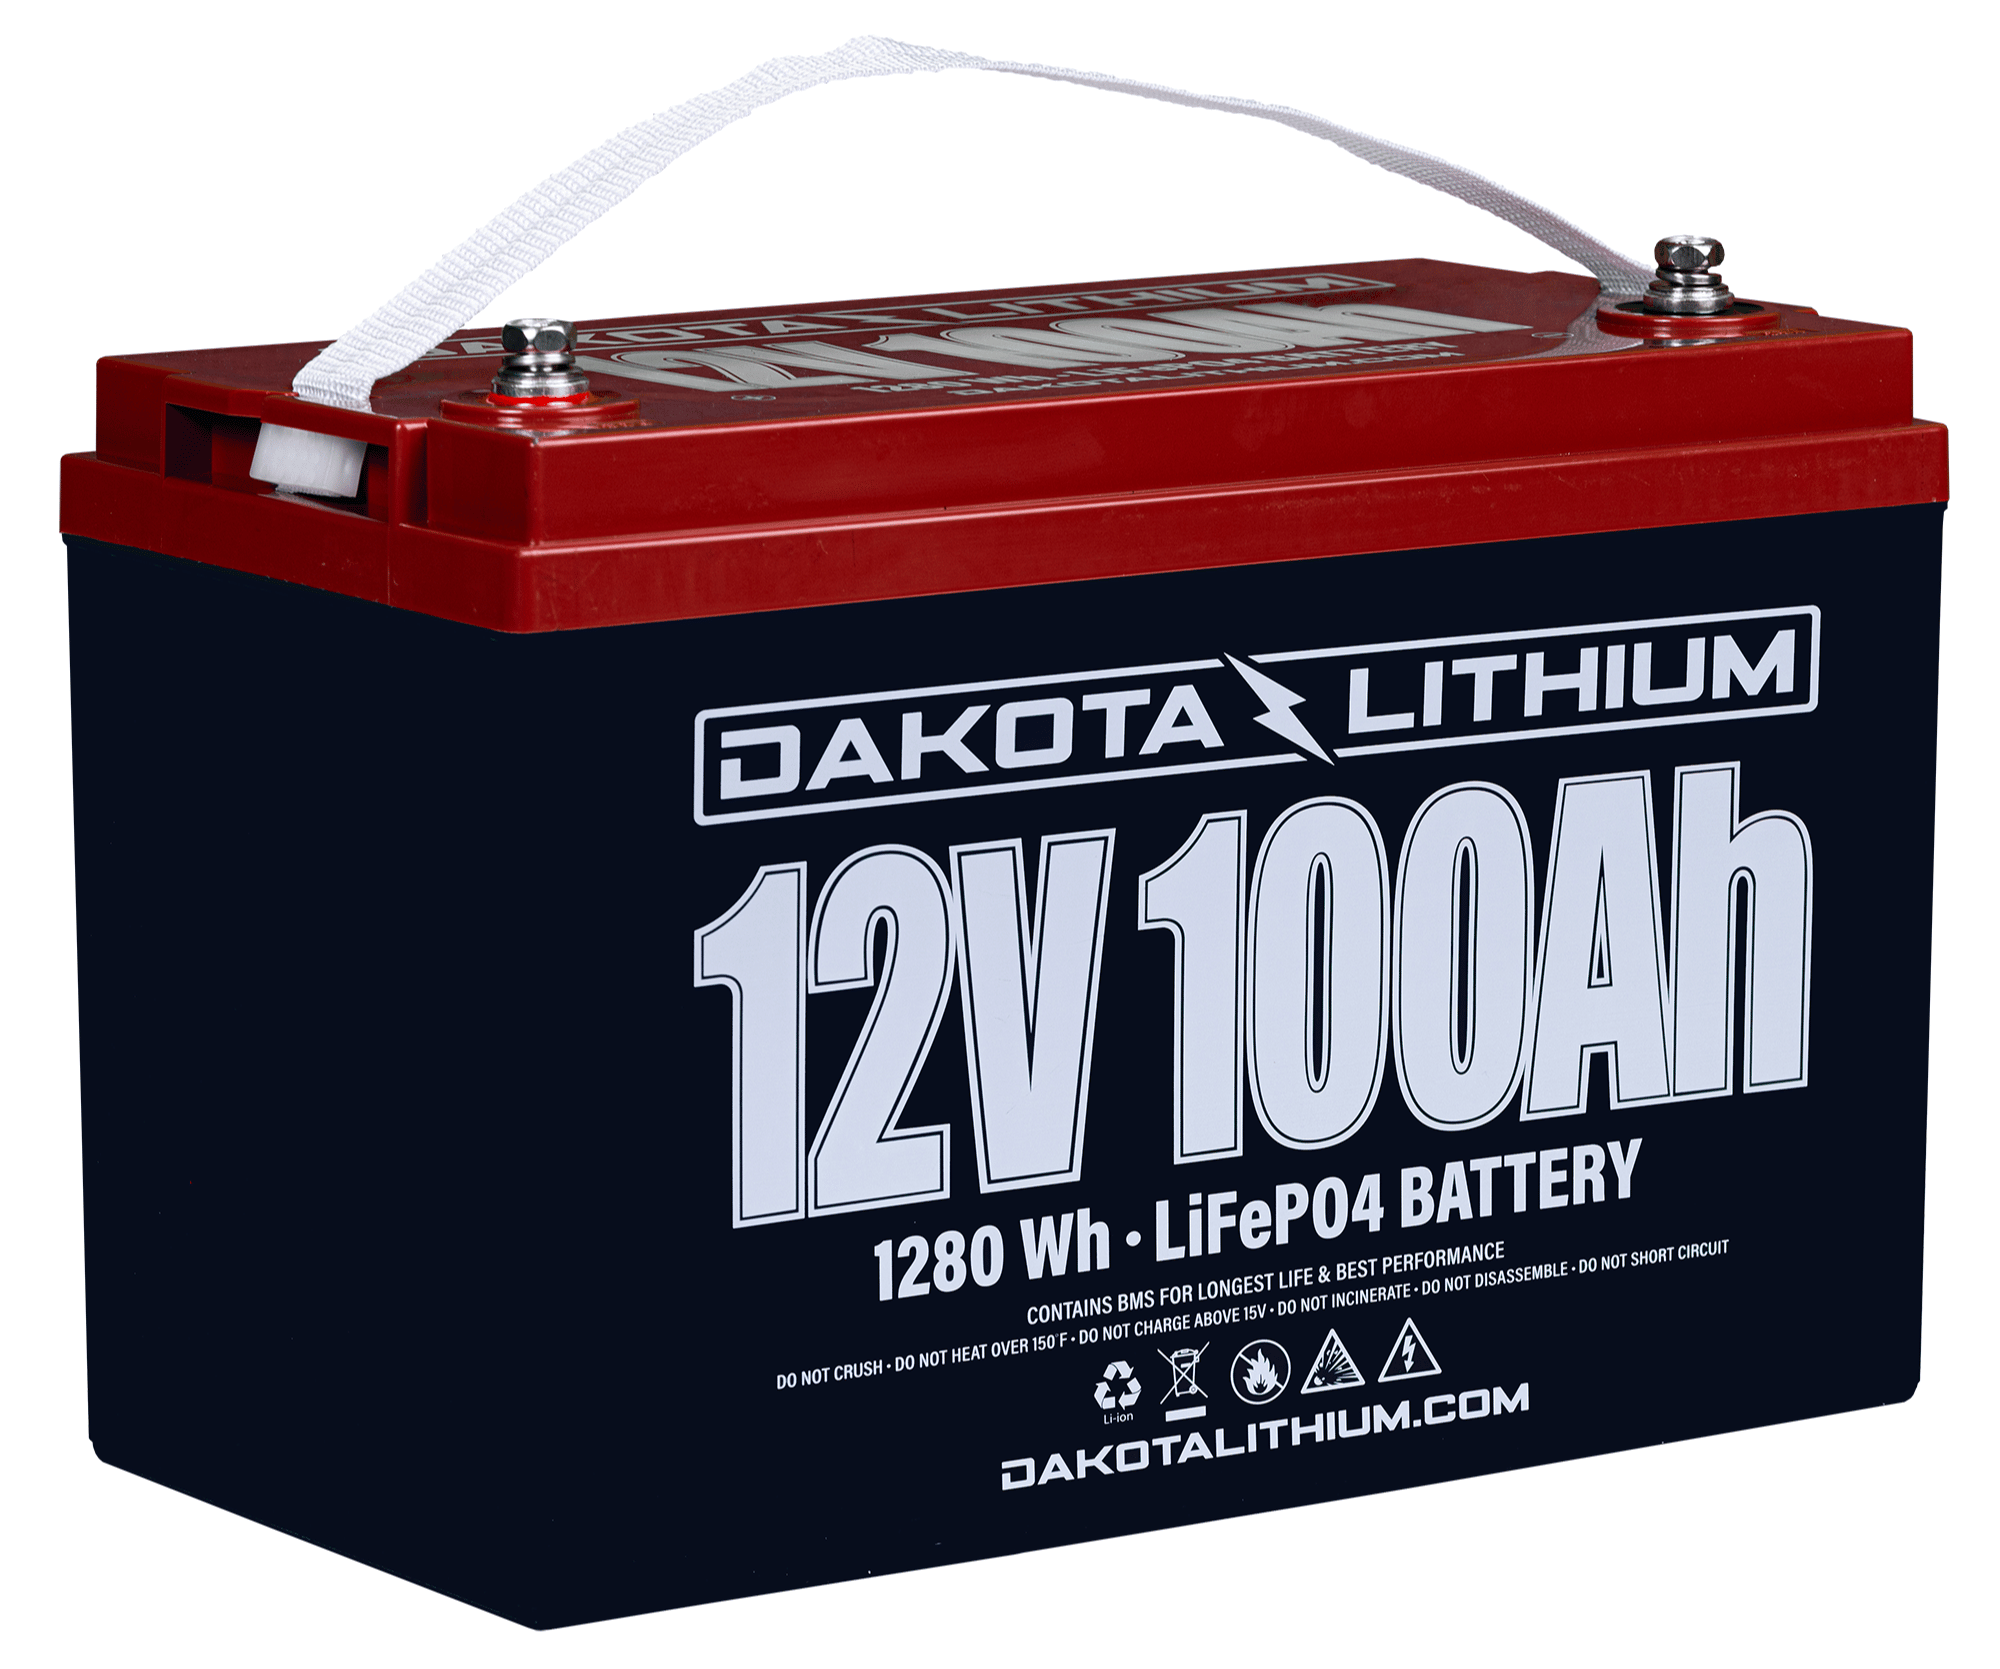 Dakota Lithium 12V 100Ah LiFePO4 11 Year USA Warranty 2000+ Deep Cycle Battery Charger Included, Size: 5.94